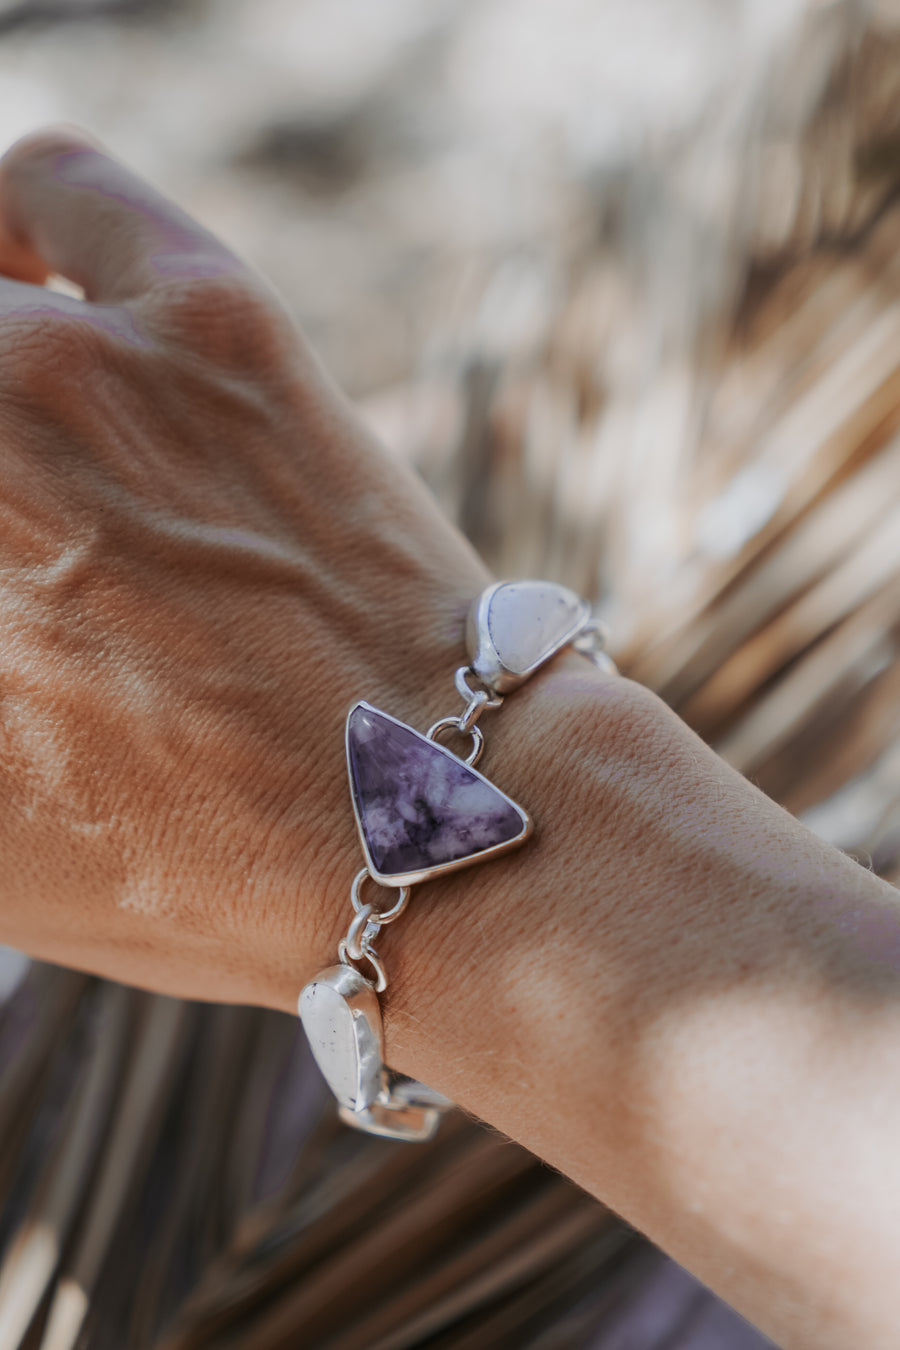 The Stepping Stone Bracelet in Campitos Turquoise, Charoite, & White Buffalo